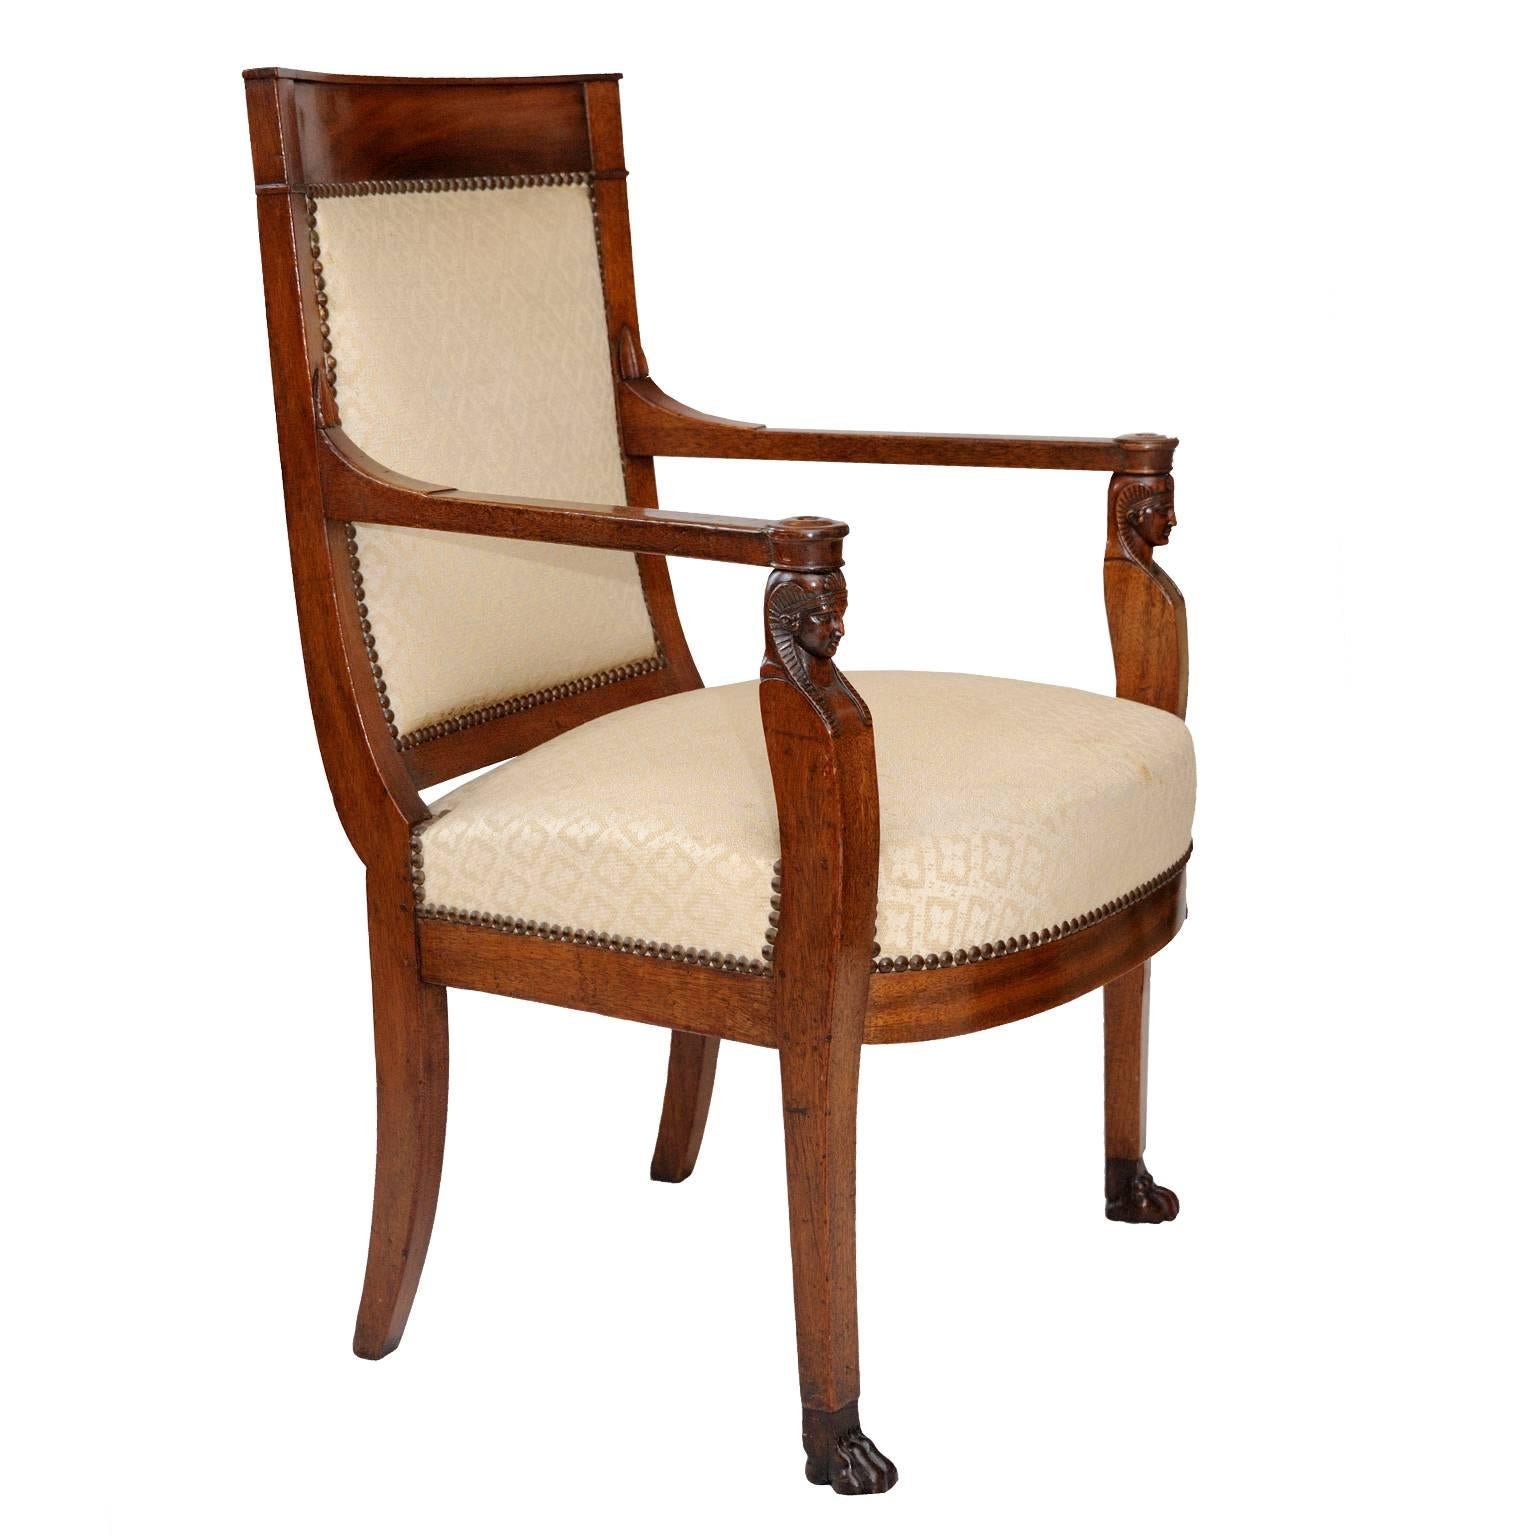 This is a wonderful example of French 19th century Napoleonic Empire Furniture. This armchair is made of mahogany and features carved Egyptian heads on the arms, circa 1805.

Napoleon imposed strict control of artistic production (among all other